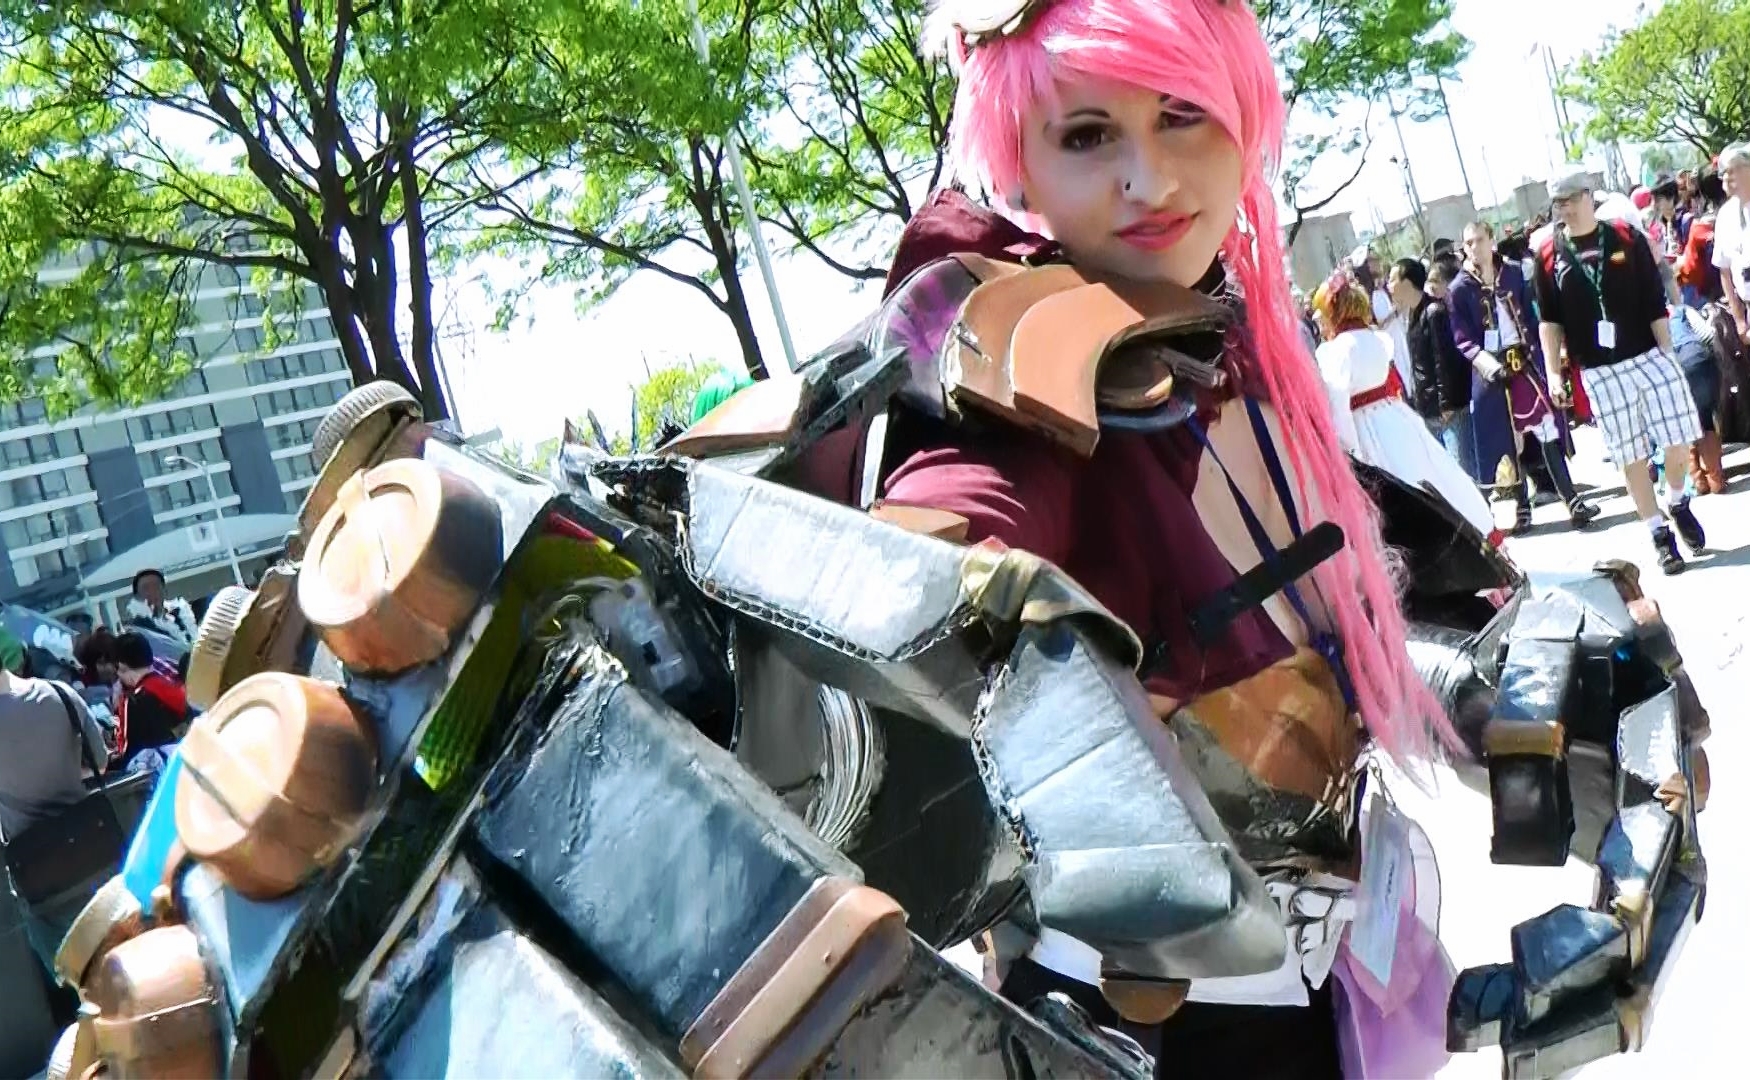  Vi from League of Legends with her giant mechanical robot fists could punch us from 10 feet away.&nbsp; 